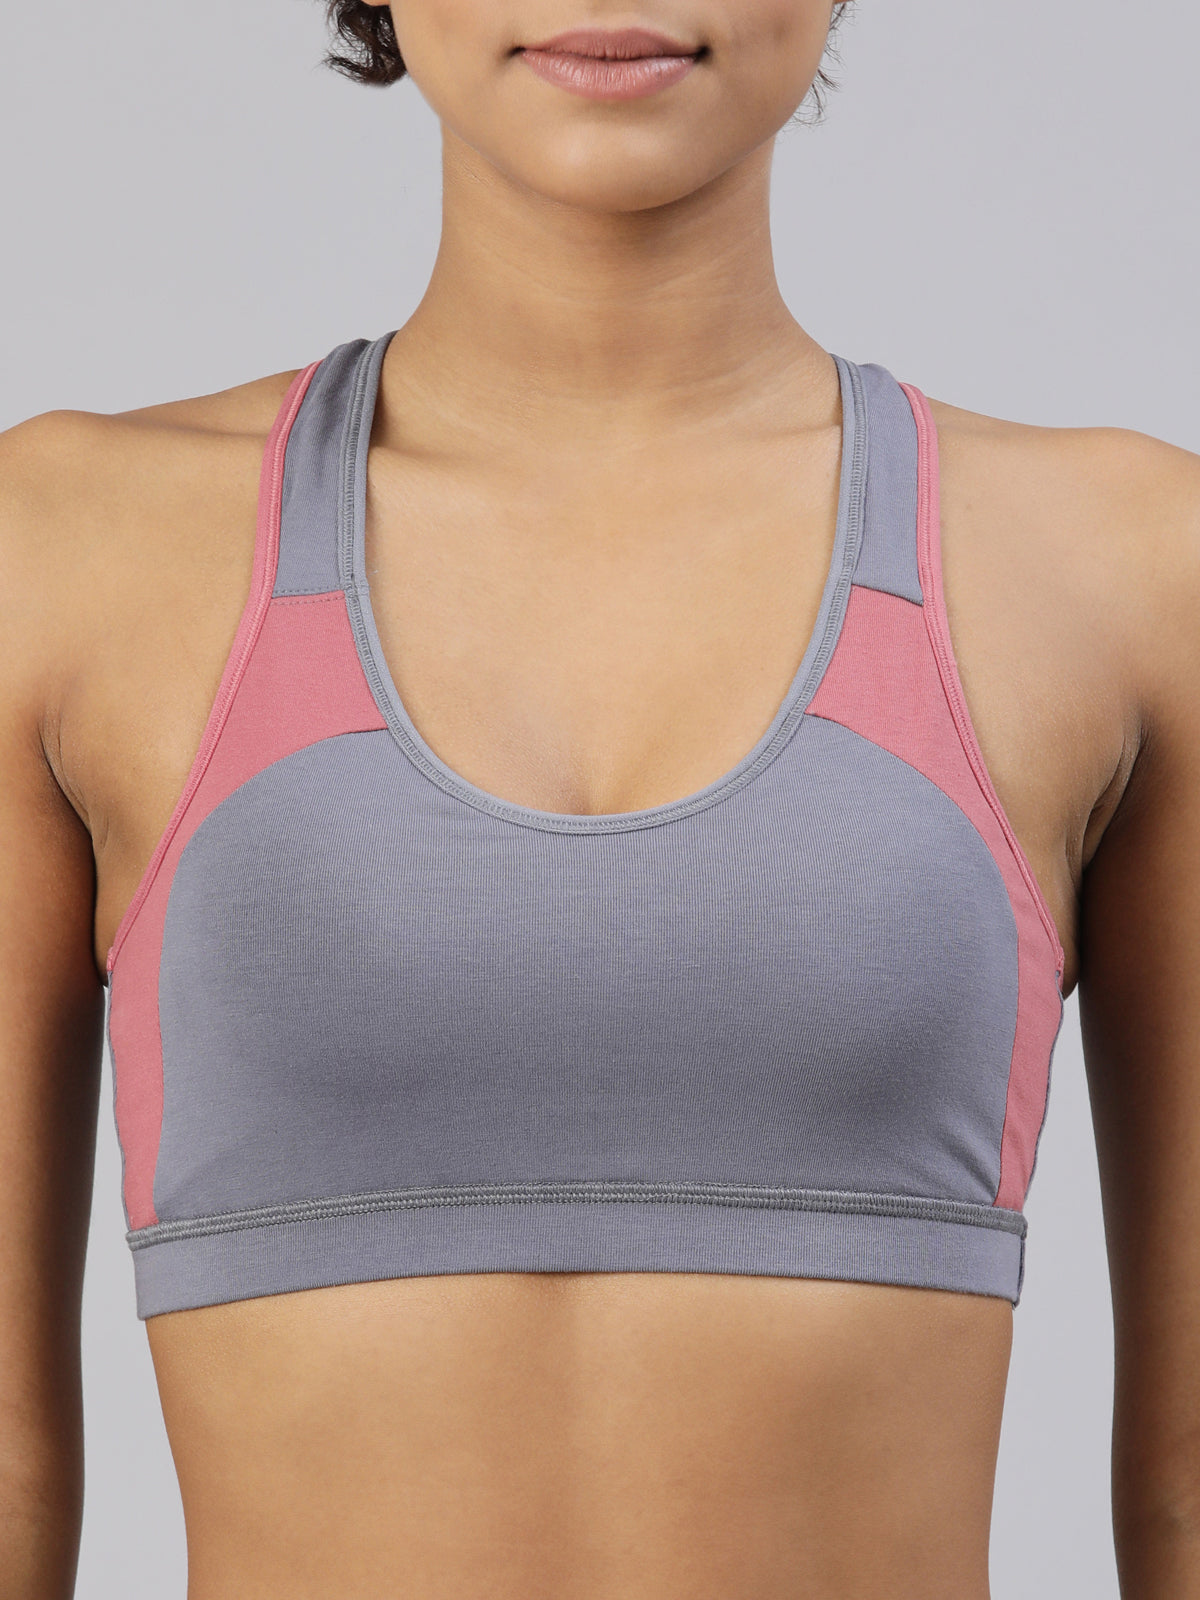 blossom-workout bra-silver grey red2-Sports collection-utility based bra